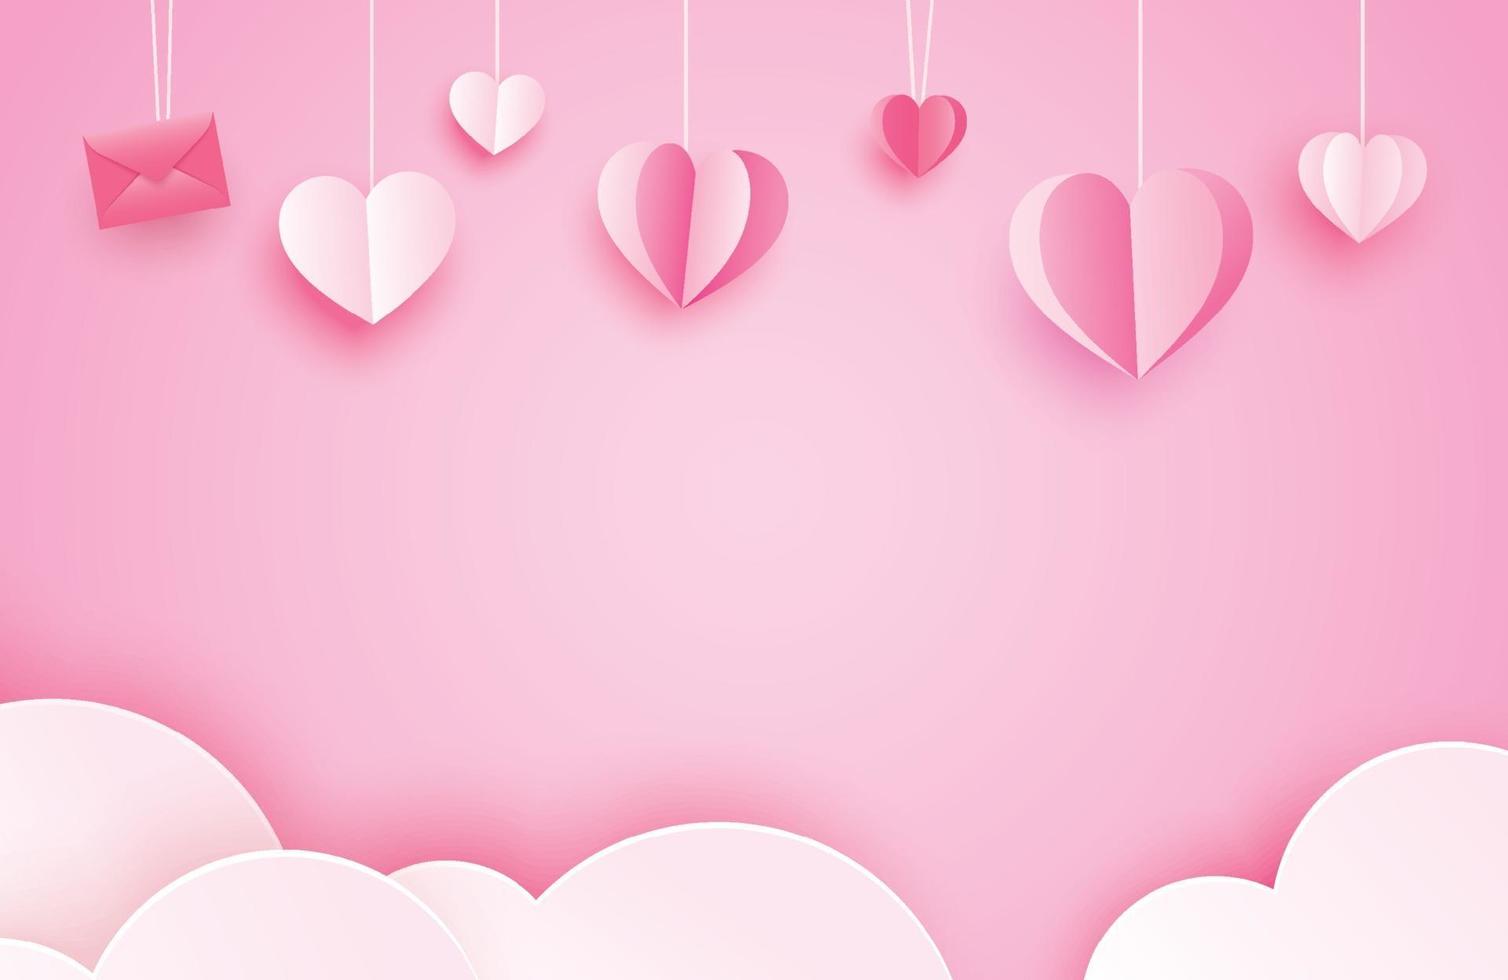 Happy valentines day greeting cards with paper hearts hanging on pink pastel background. vector